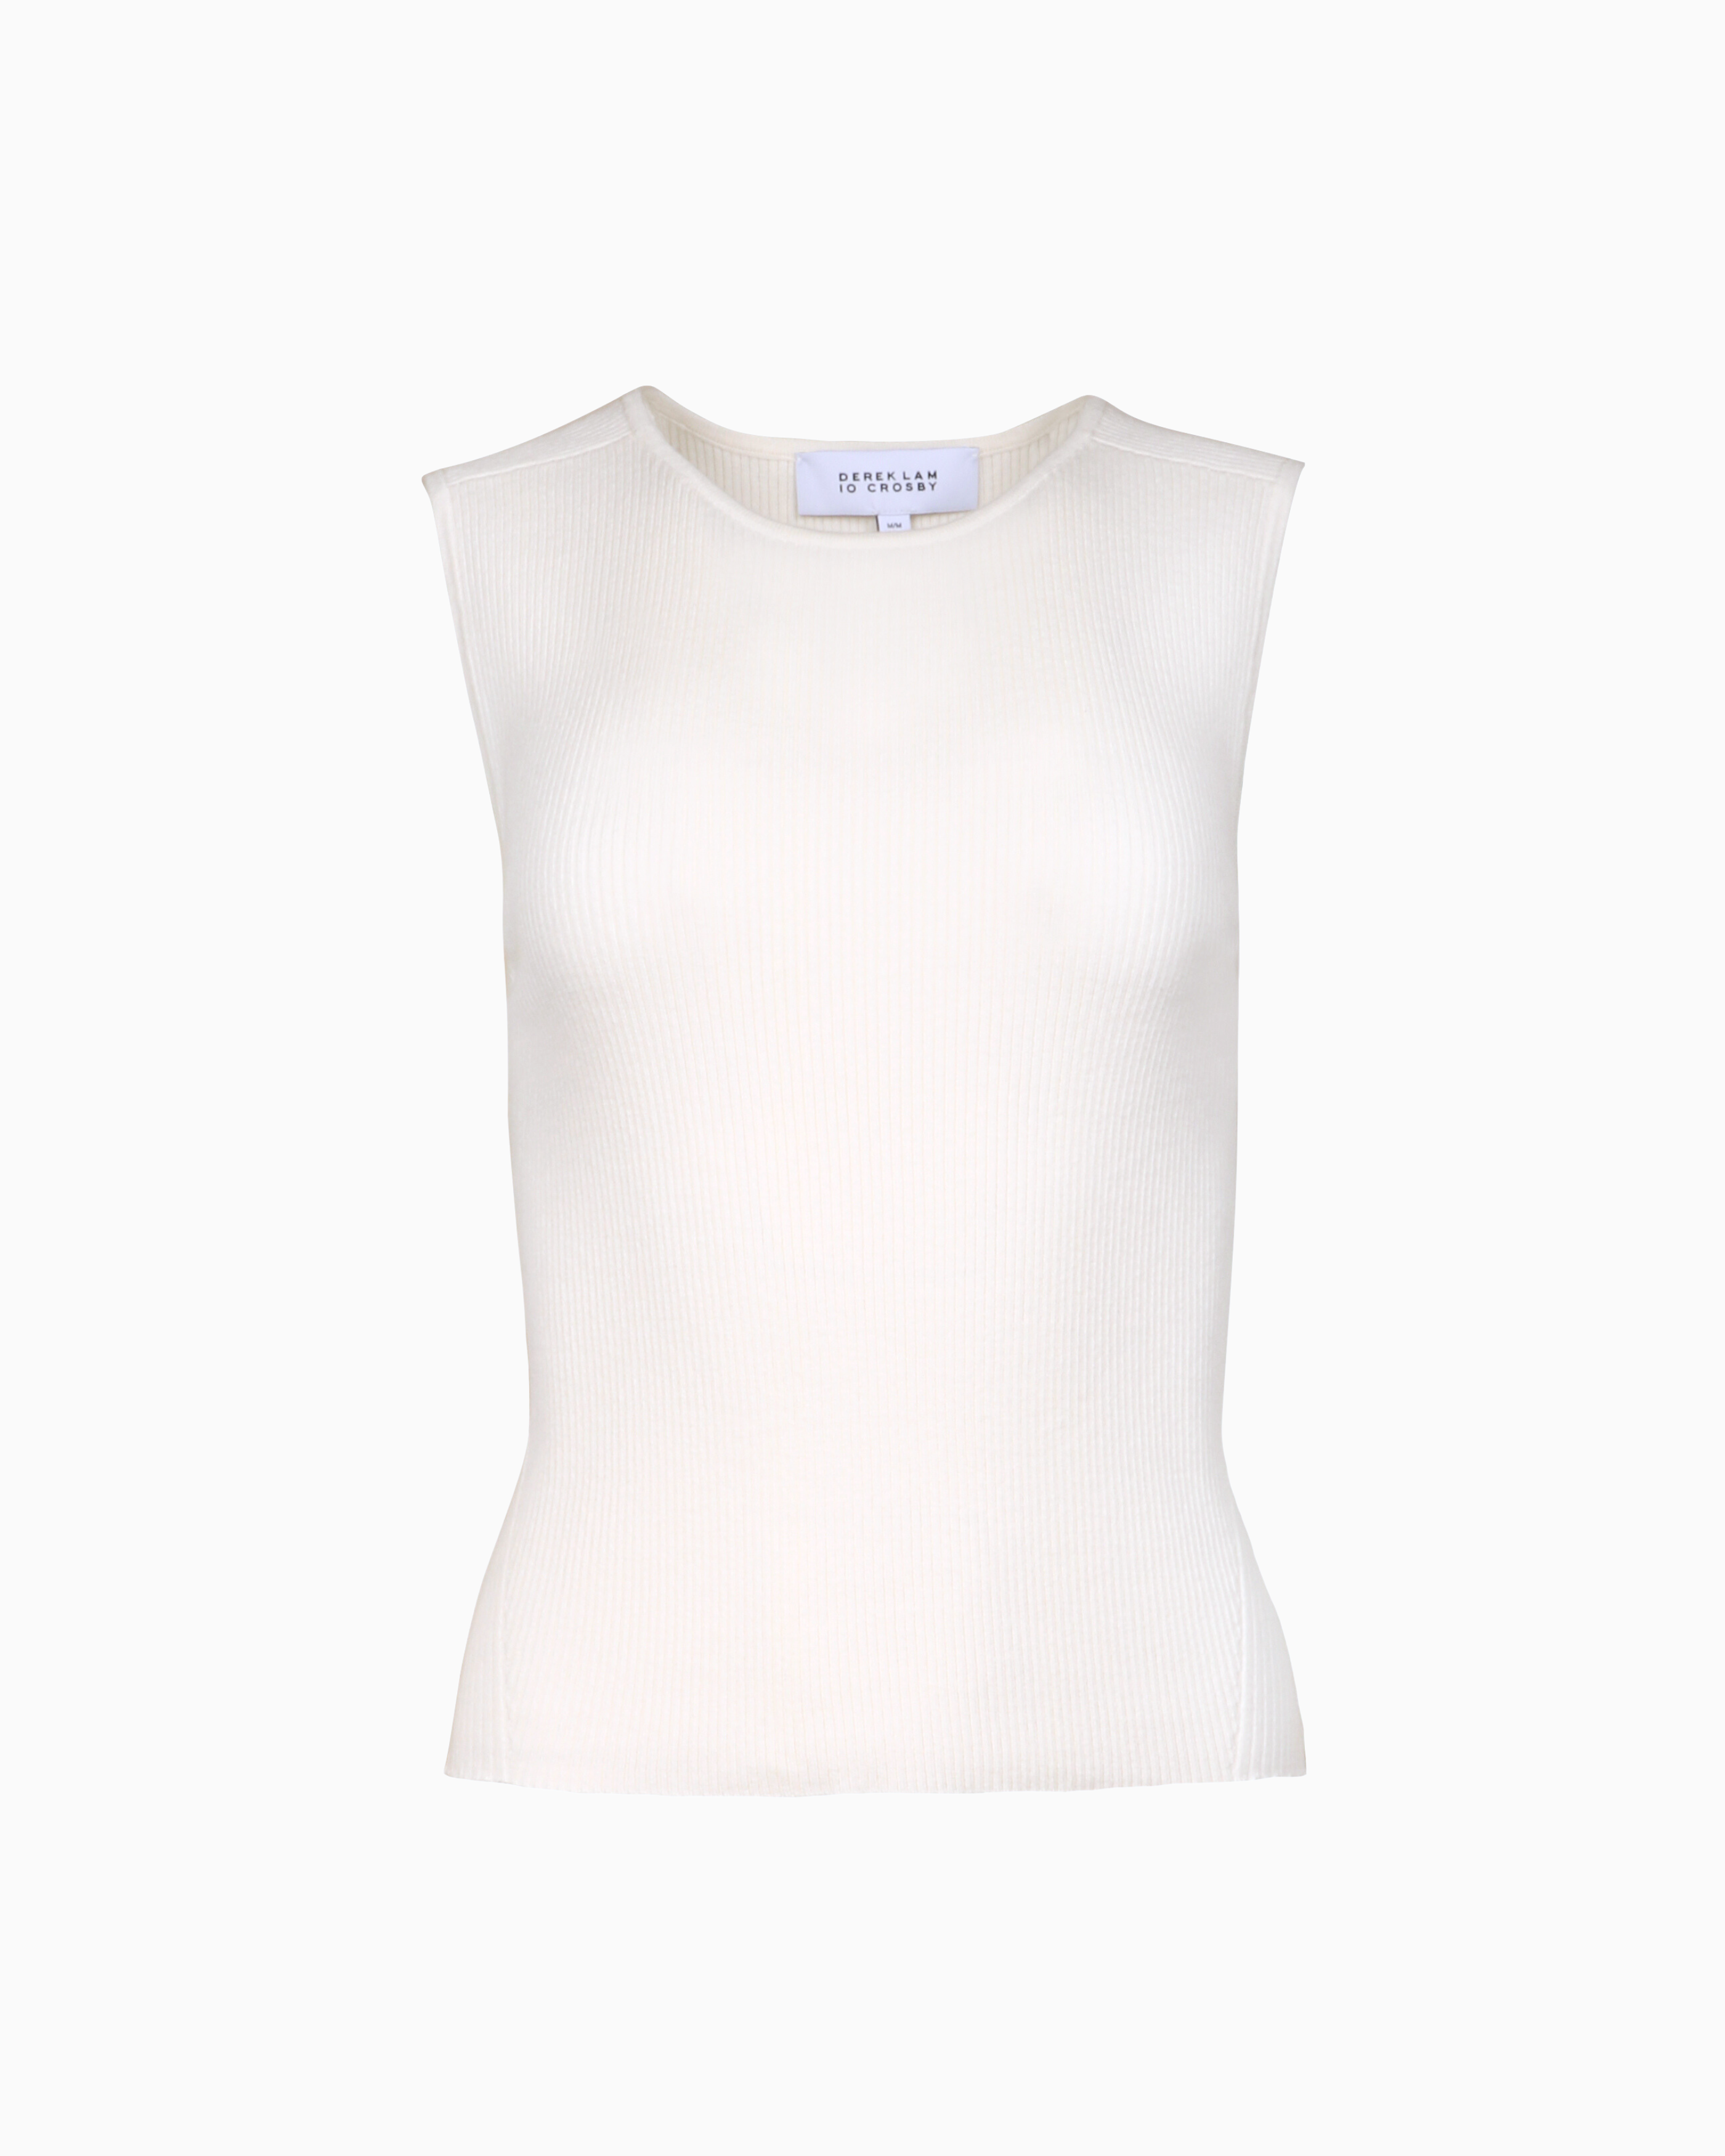 Derek Lam Ariana Muscle Ribbed Sweater Tank in Ivory